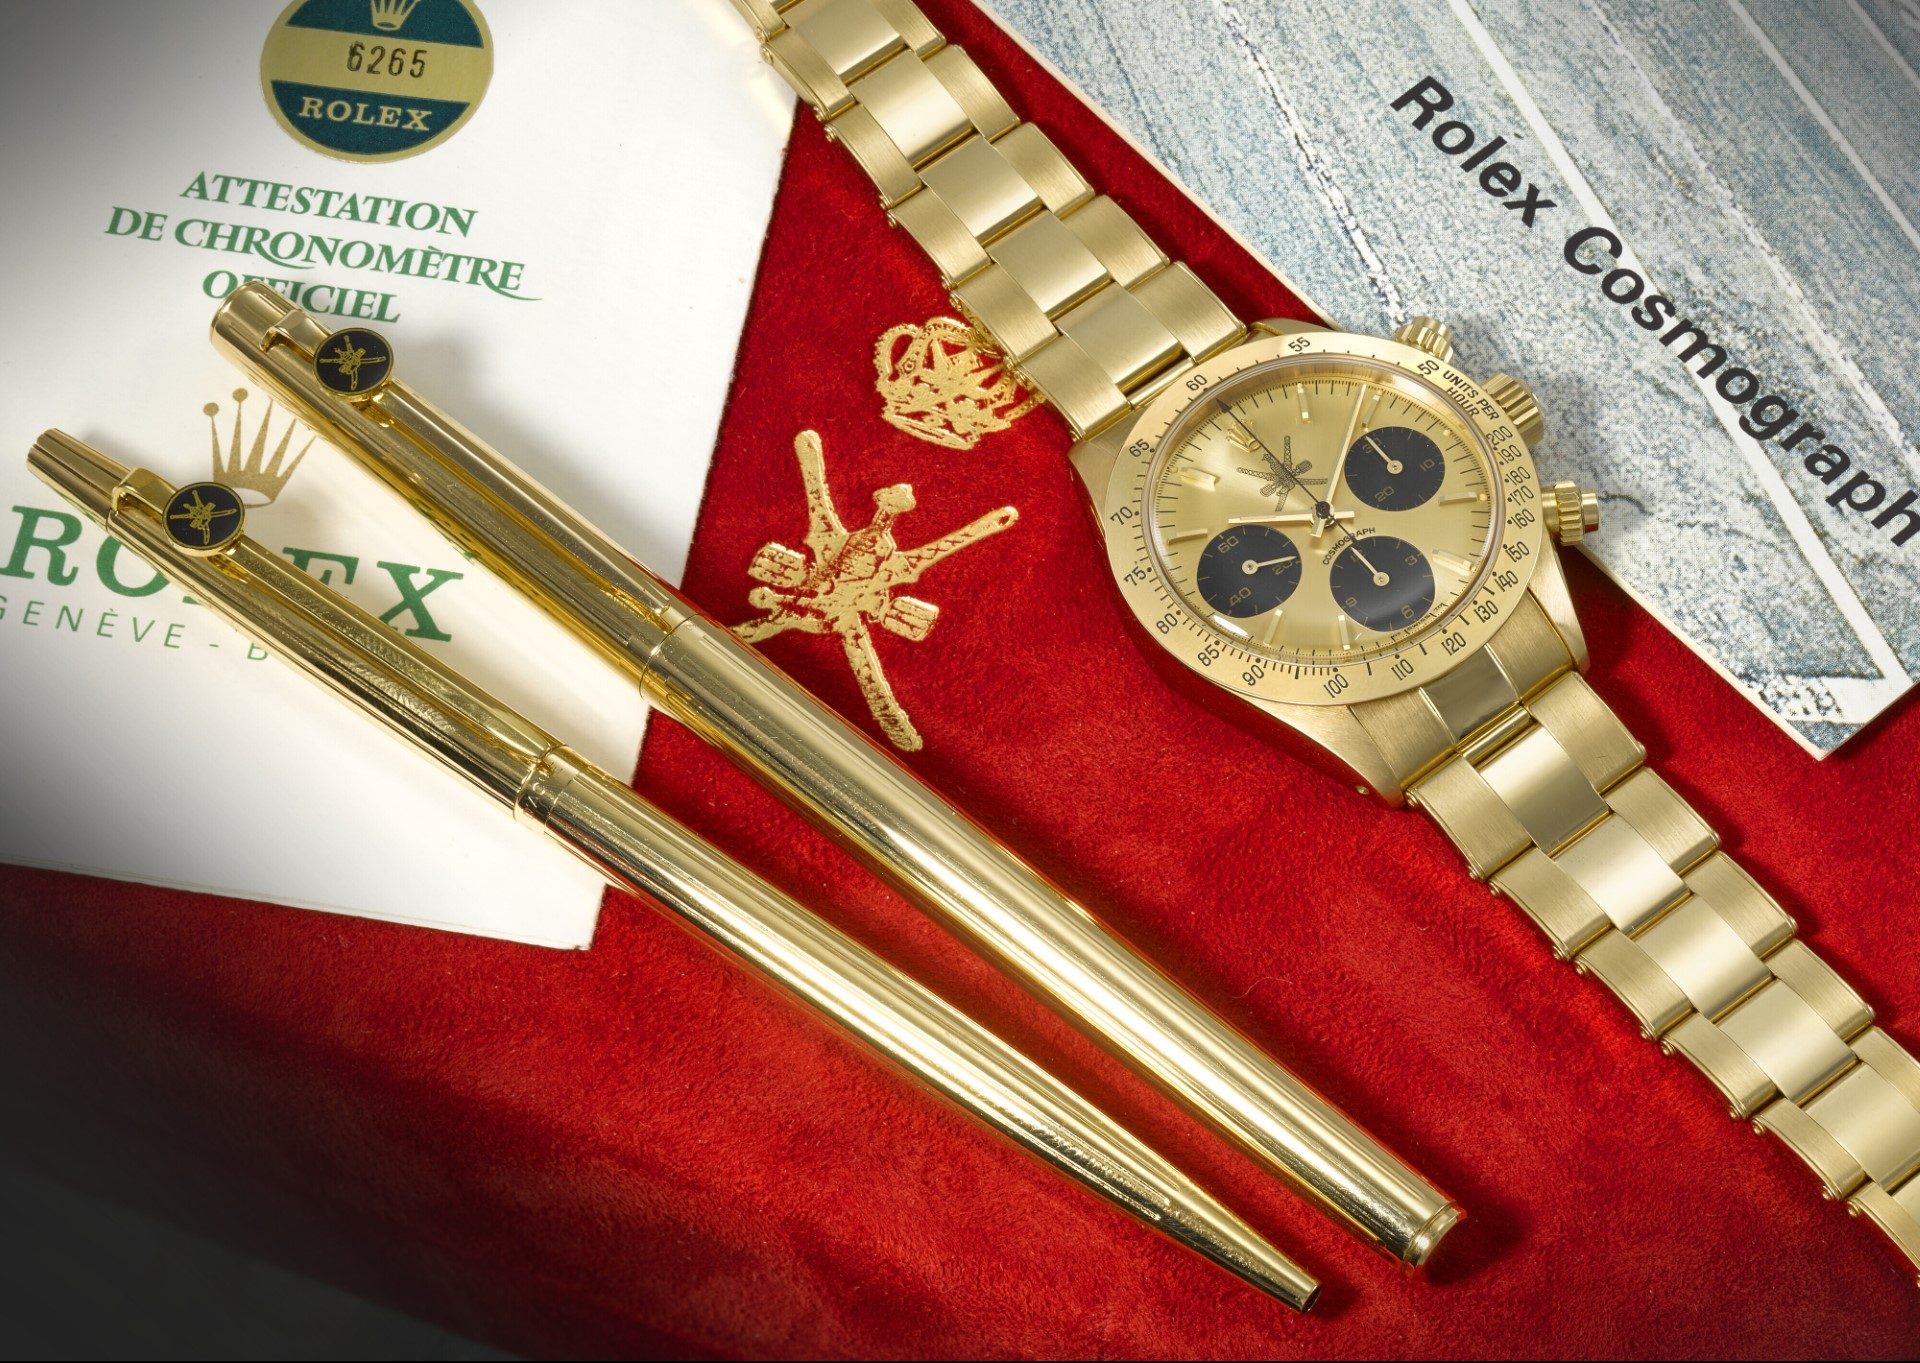 Bonus Forkert forvridning Rolex watches made for The Sultan of Oman at Christie's - Watch I Love